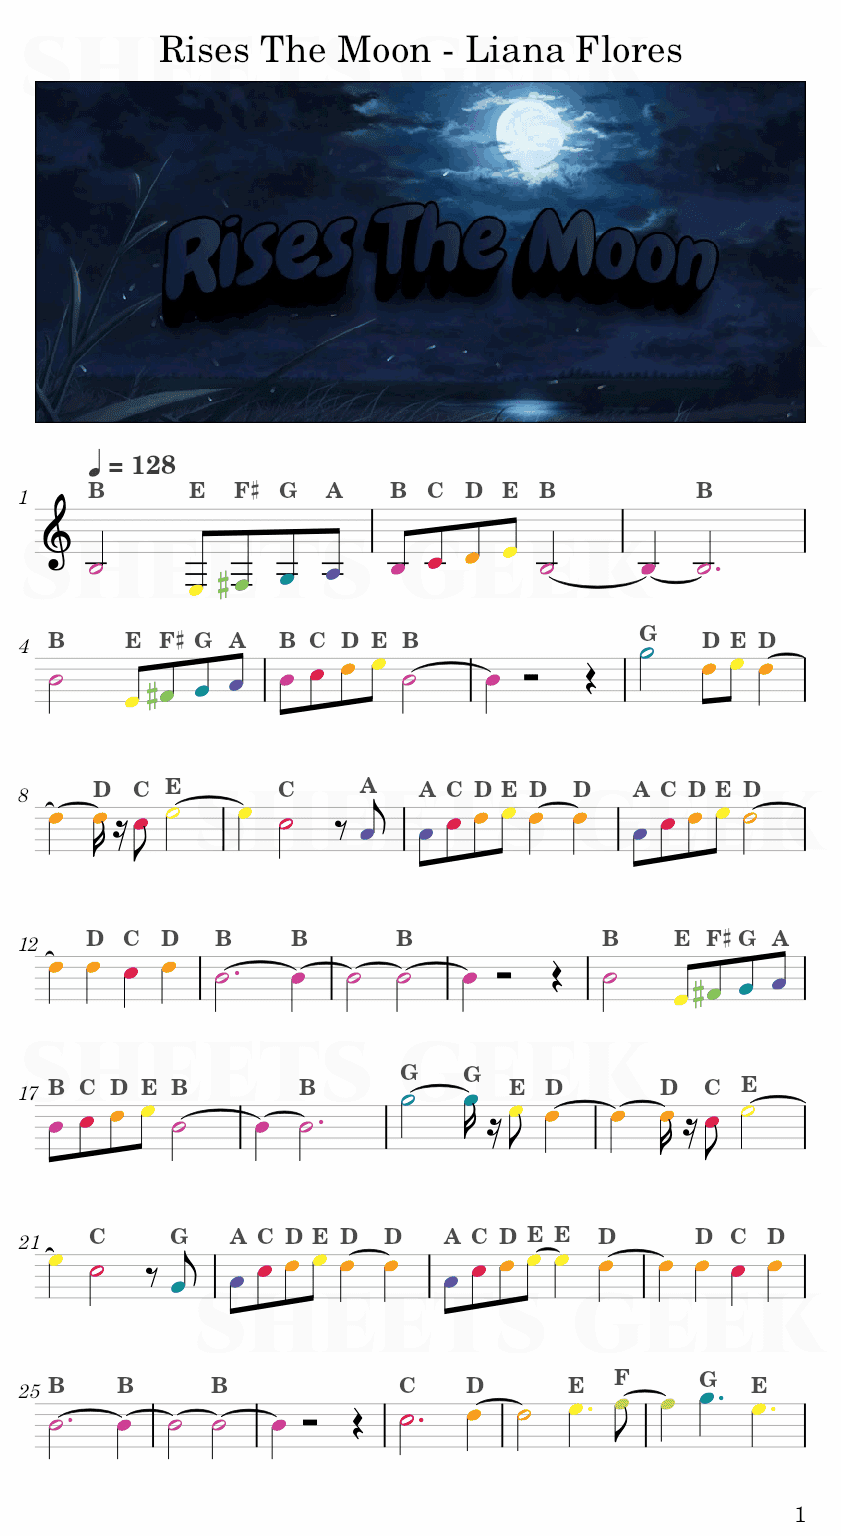 Rises The Moon - Liana Flores Easy Sheet Music Free for piano, keyboard, flute, violin, sax, cello page 1